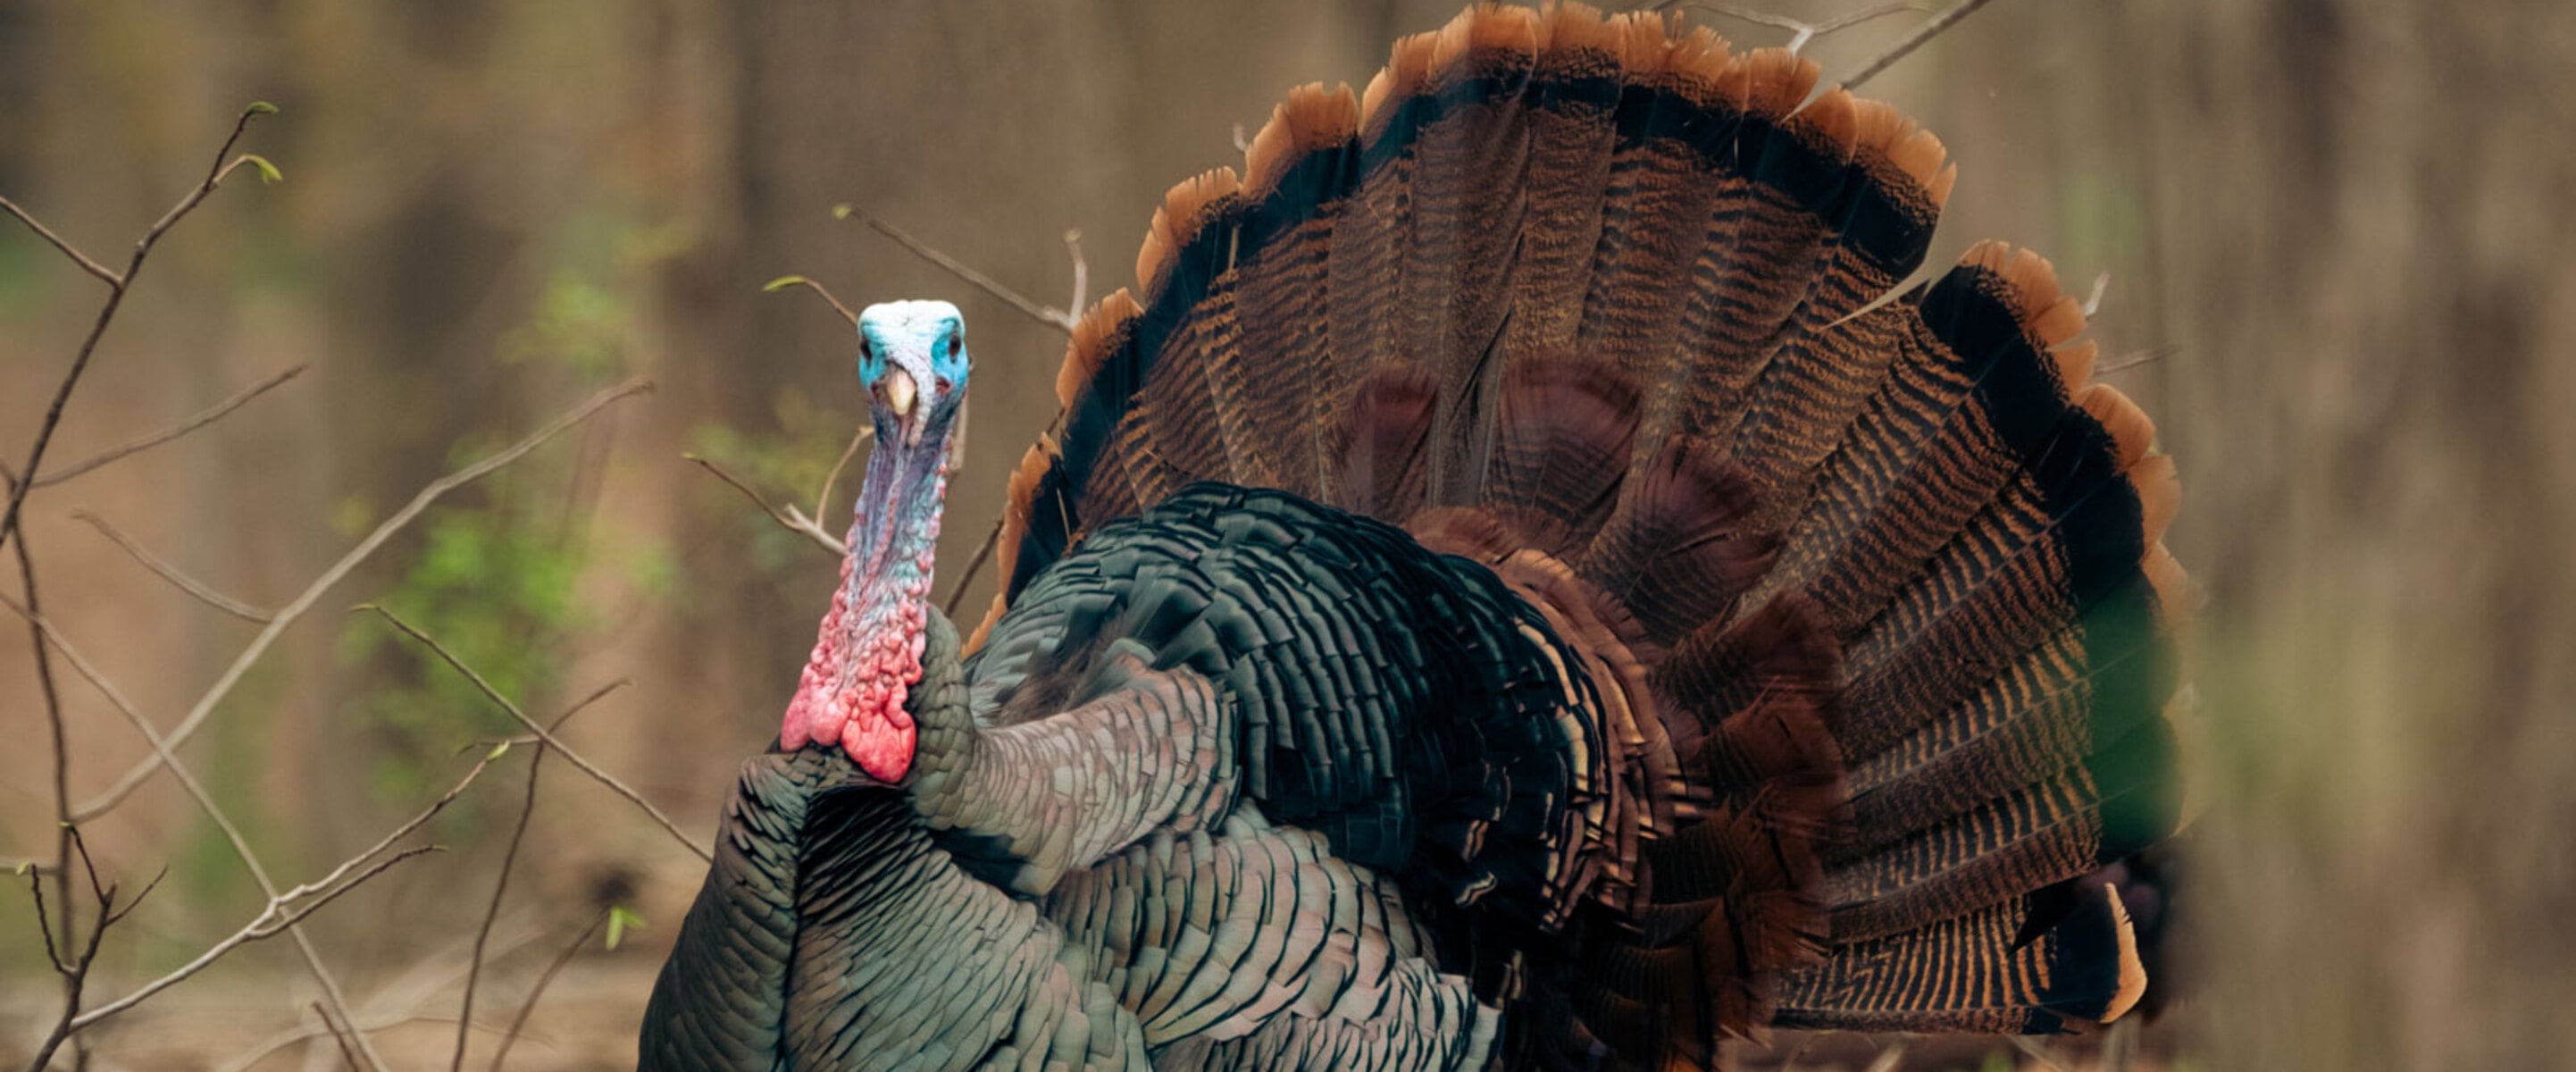 12 Wonderful Turkey Facts That Will Make Your Thanksgiving a Vegan One